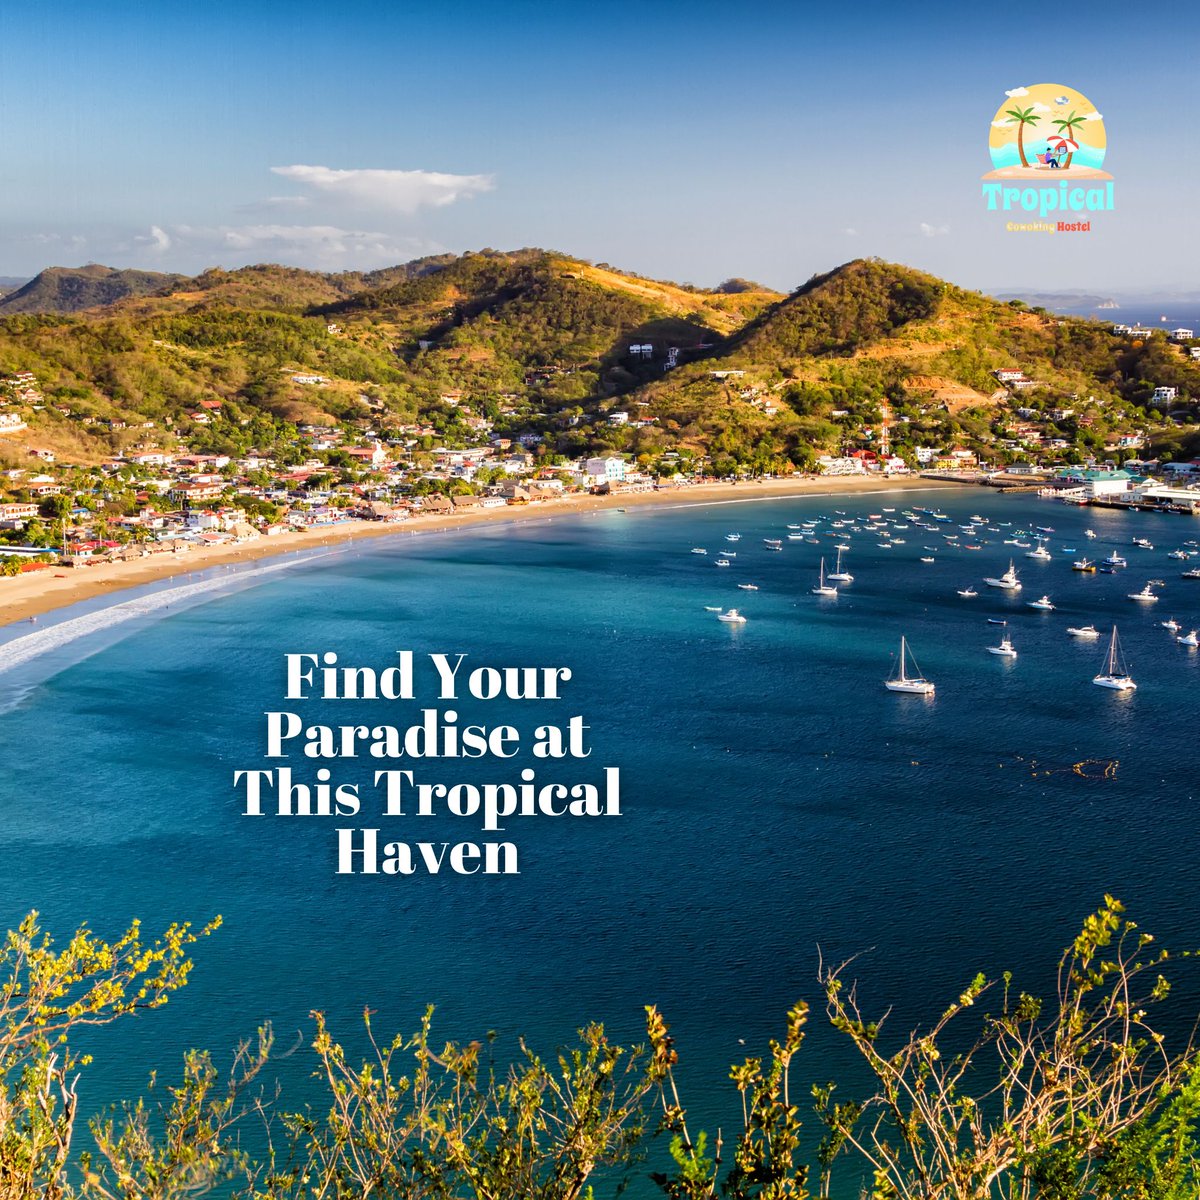 Embrace the freedom of working remotely while immersing yourself in the beauty of nature. 
---
booking.com/Share-n6hzHP 
.
#DigitalNomadLife #WorkAndTravel #RemoteWorkParadise #TropicalHaven #NatureInspiration